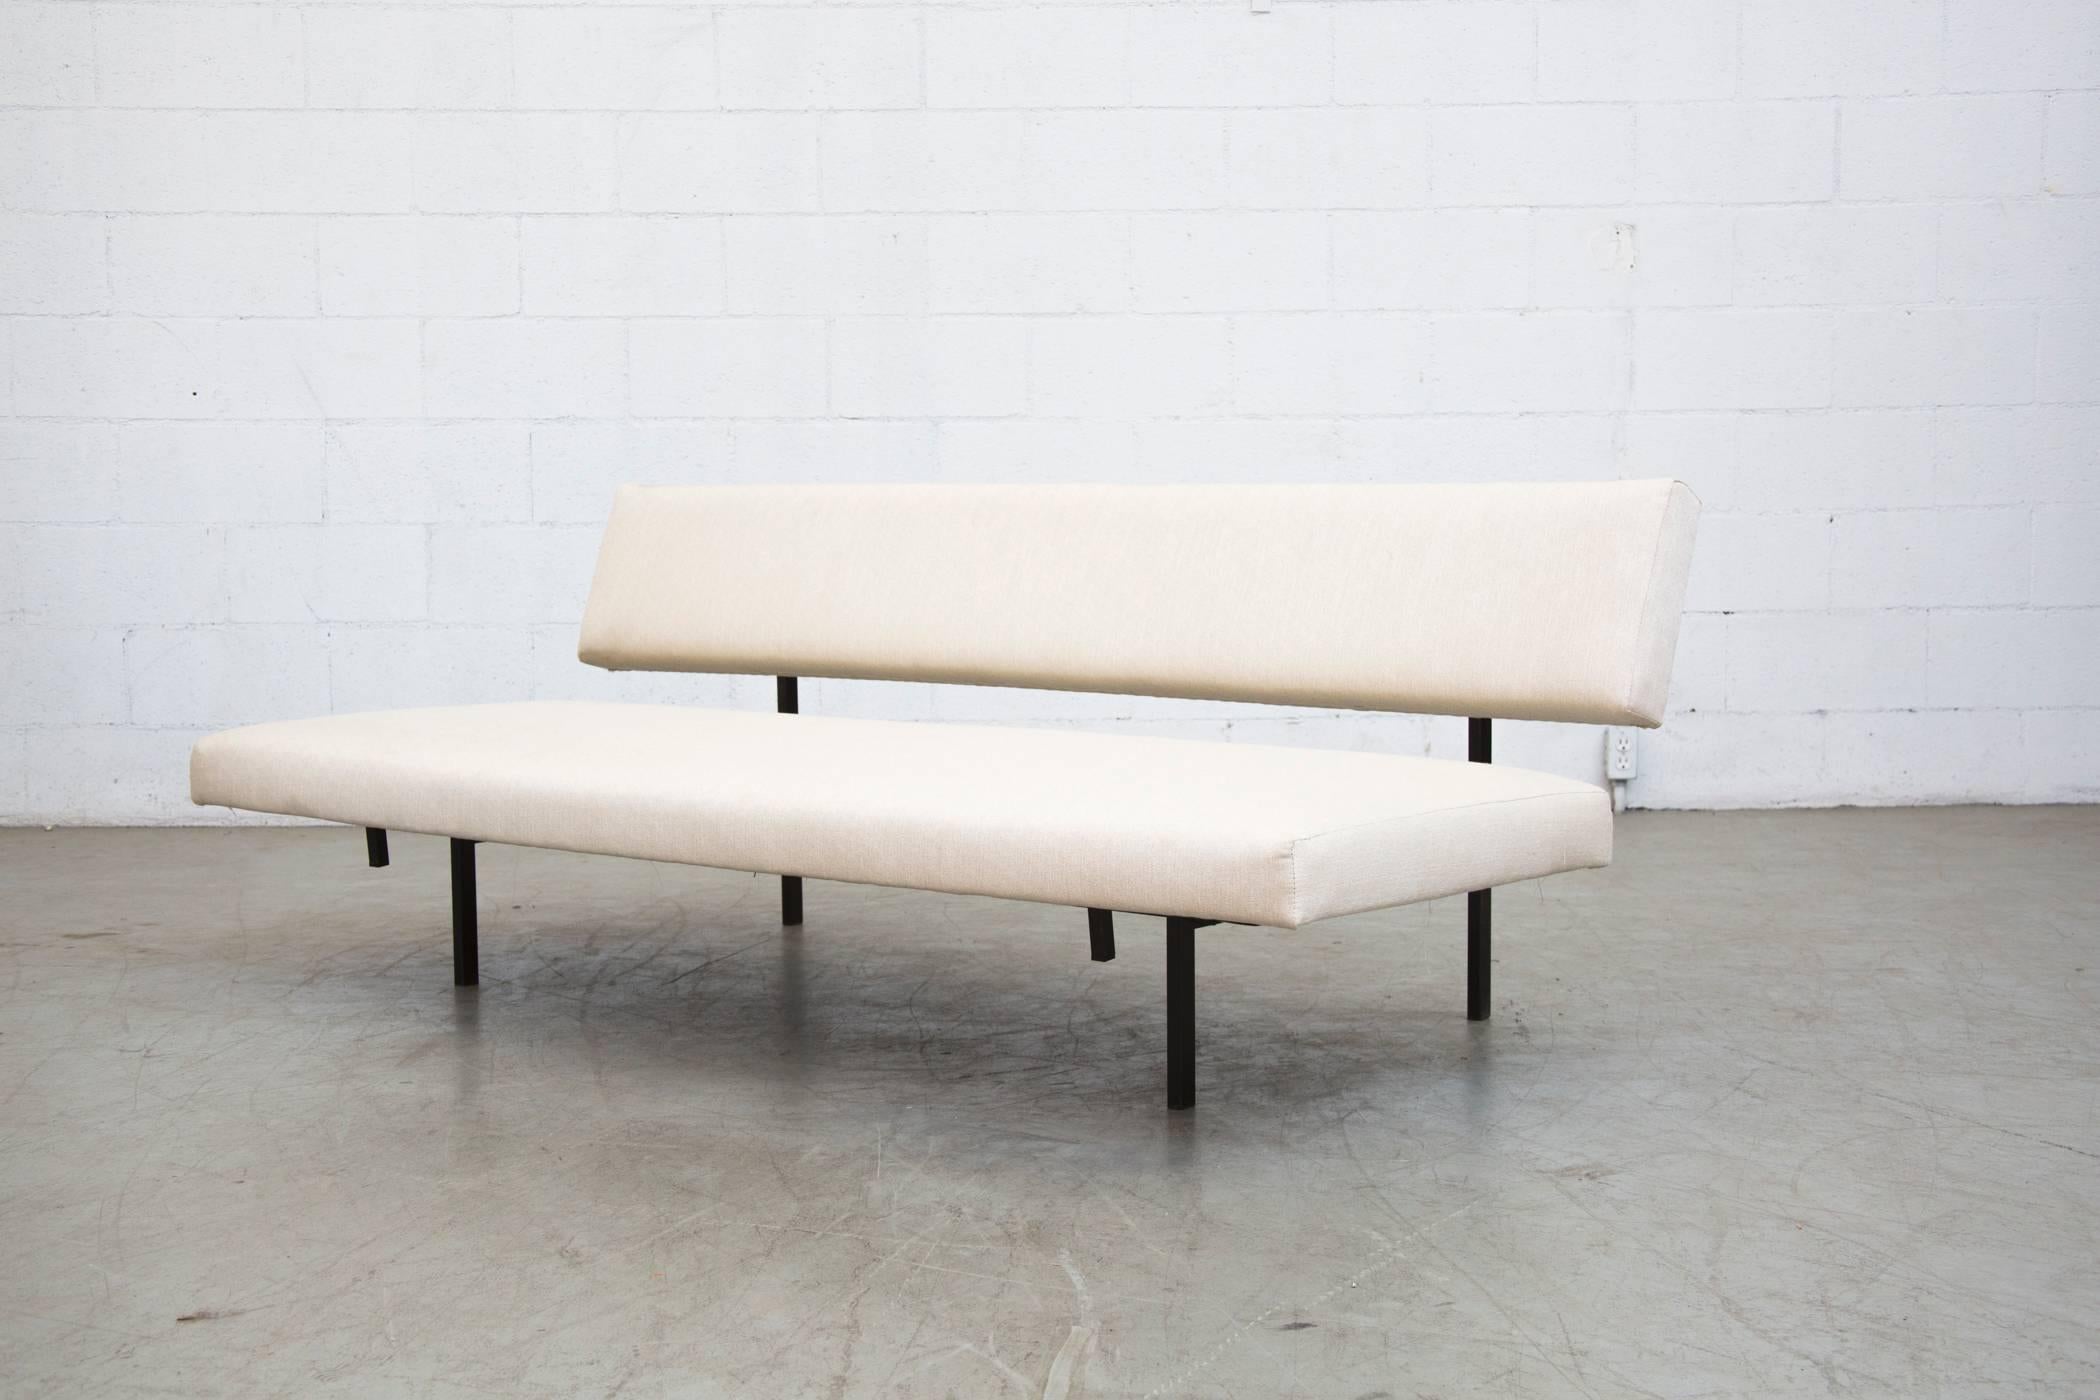 Bone white upholstered Martin Visser sleeper sofa with pull out bench that levels to a single bed for your guest. Frame in good original condition with wear consistent with age and use. When pulled out, seat opens to 36.5